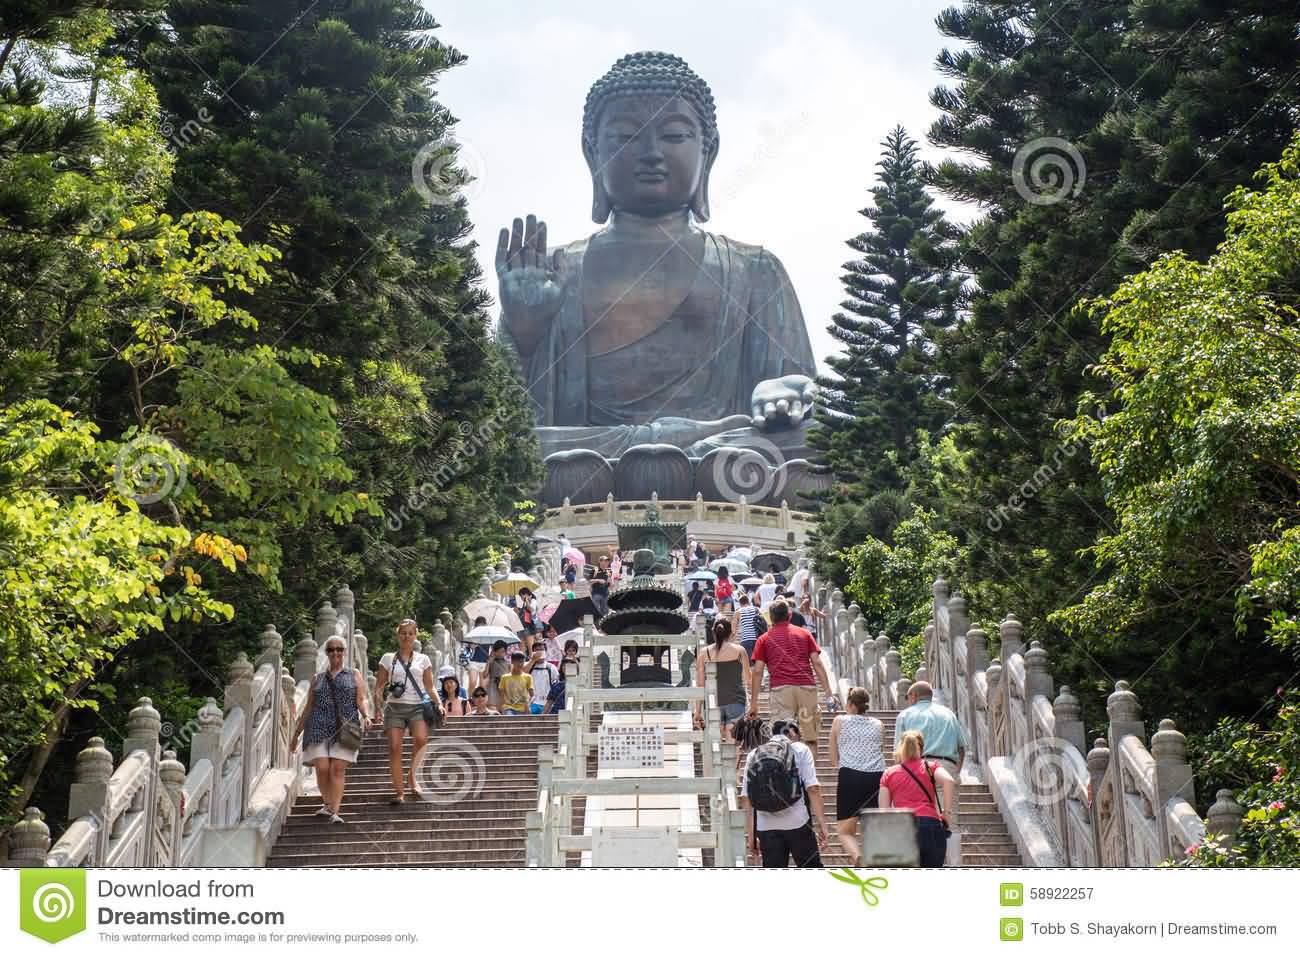 Large Number of Tourists Sightseeing The Tian Tan Buddha